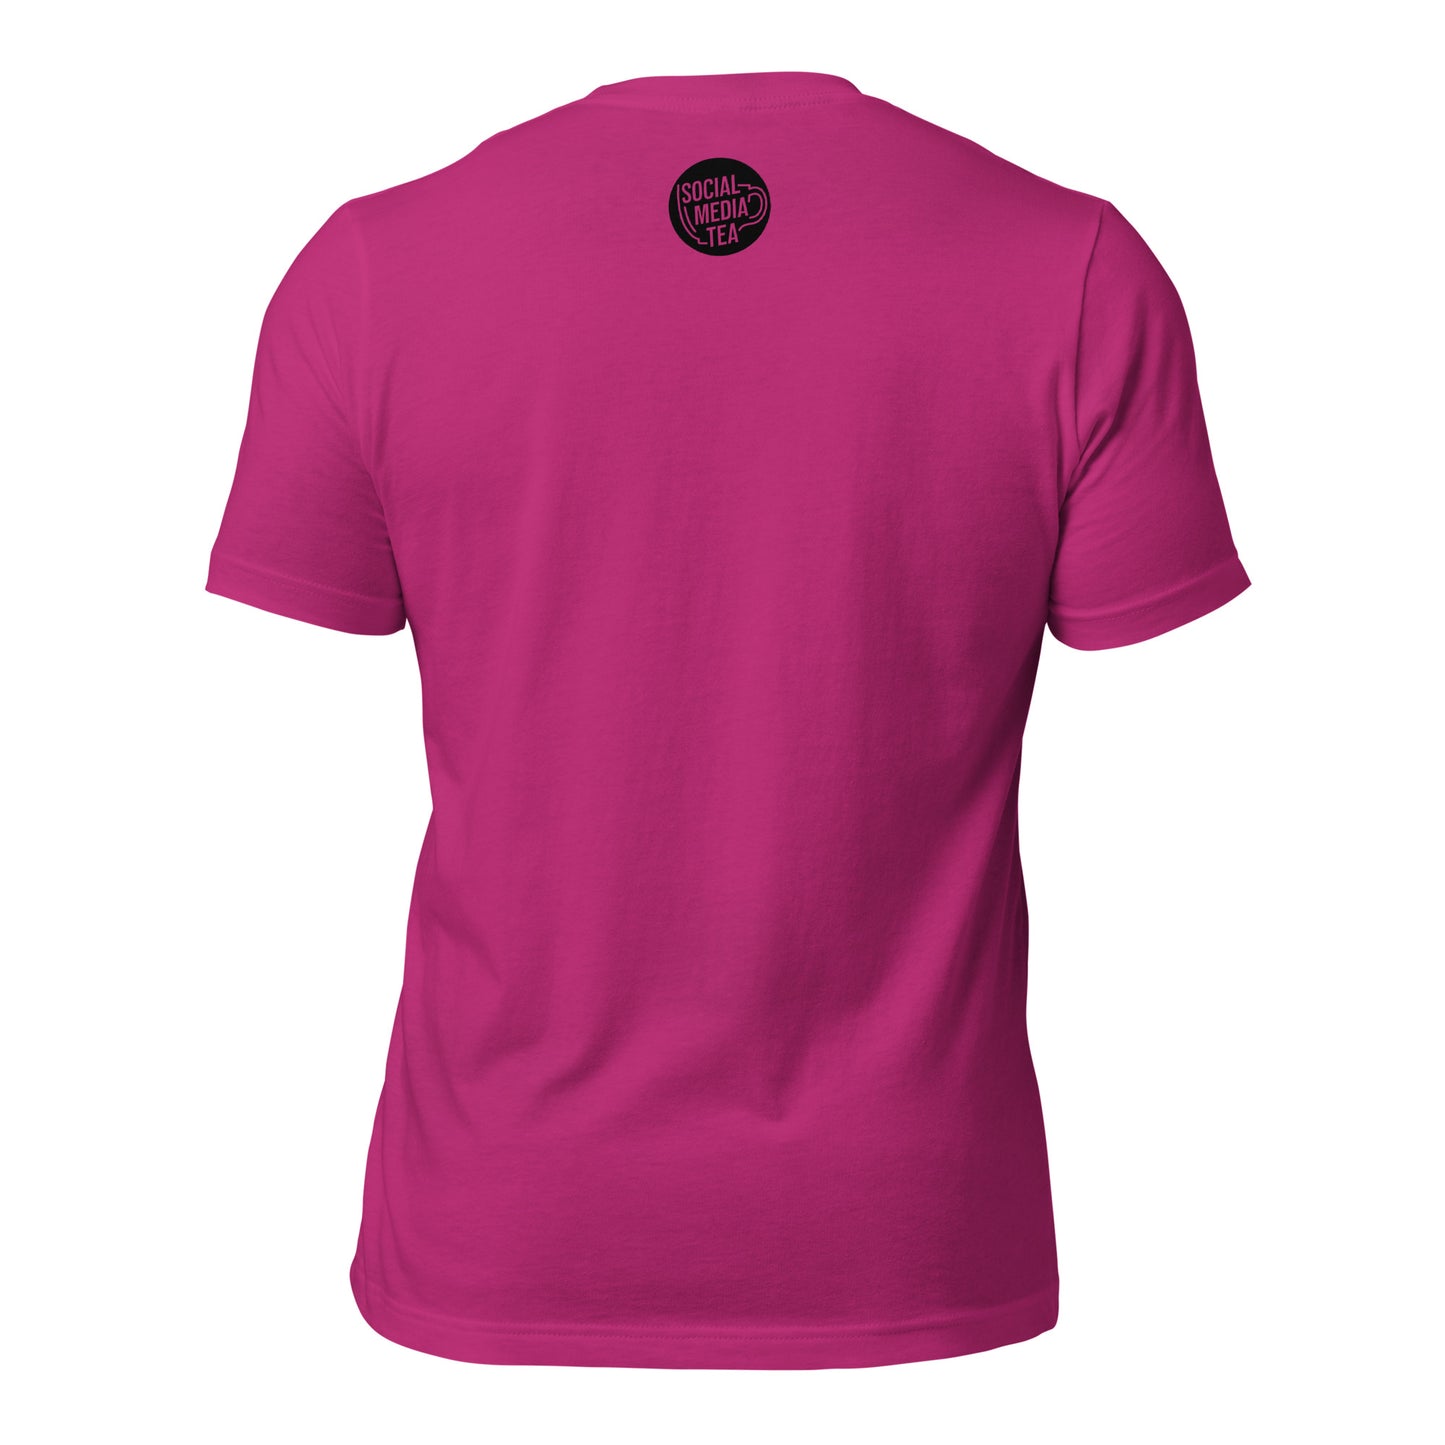 Back of a hot pink shirt with the Social Media Tea logo at the nape of the neck.